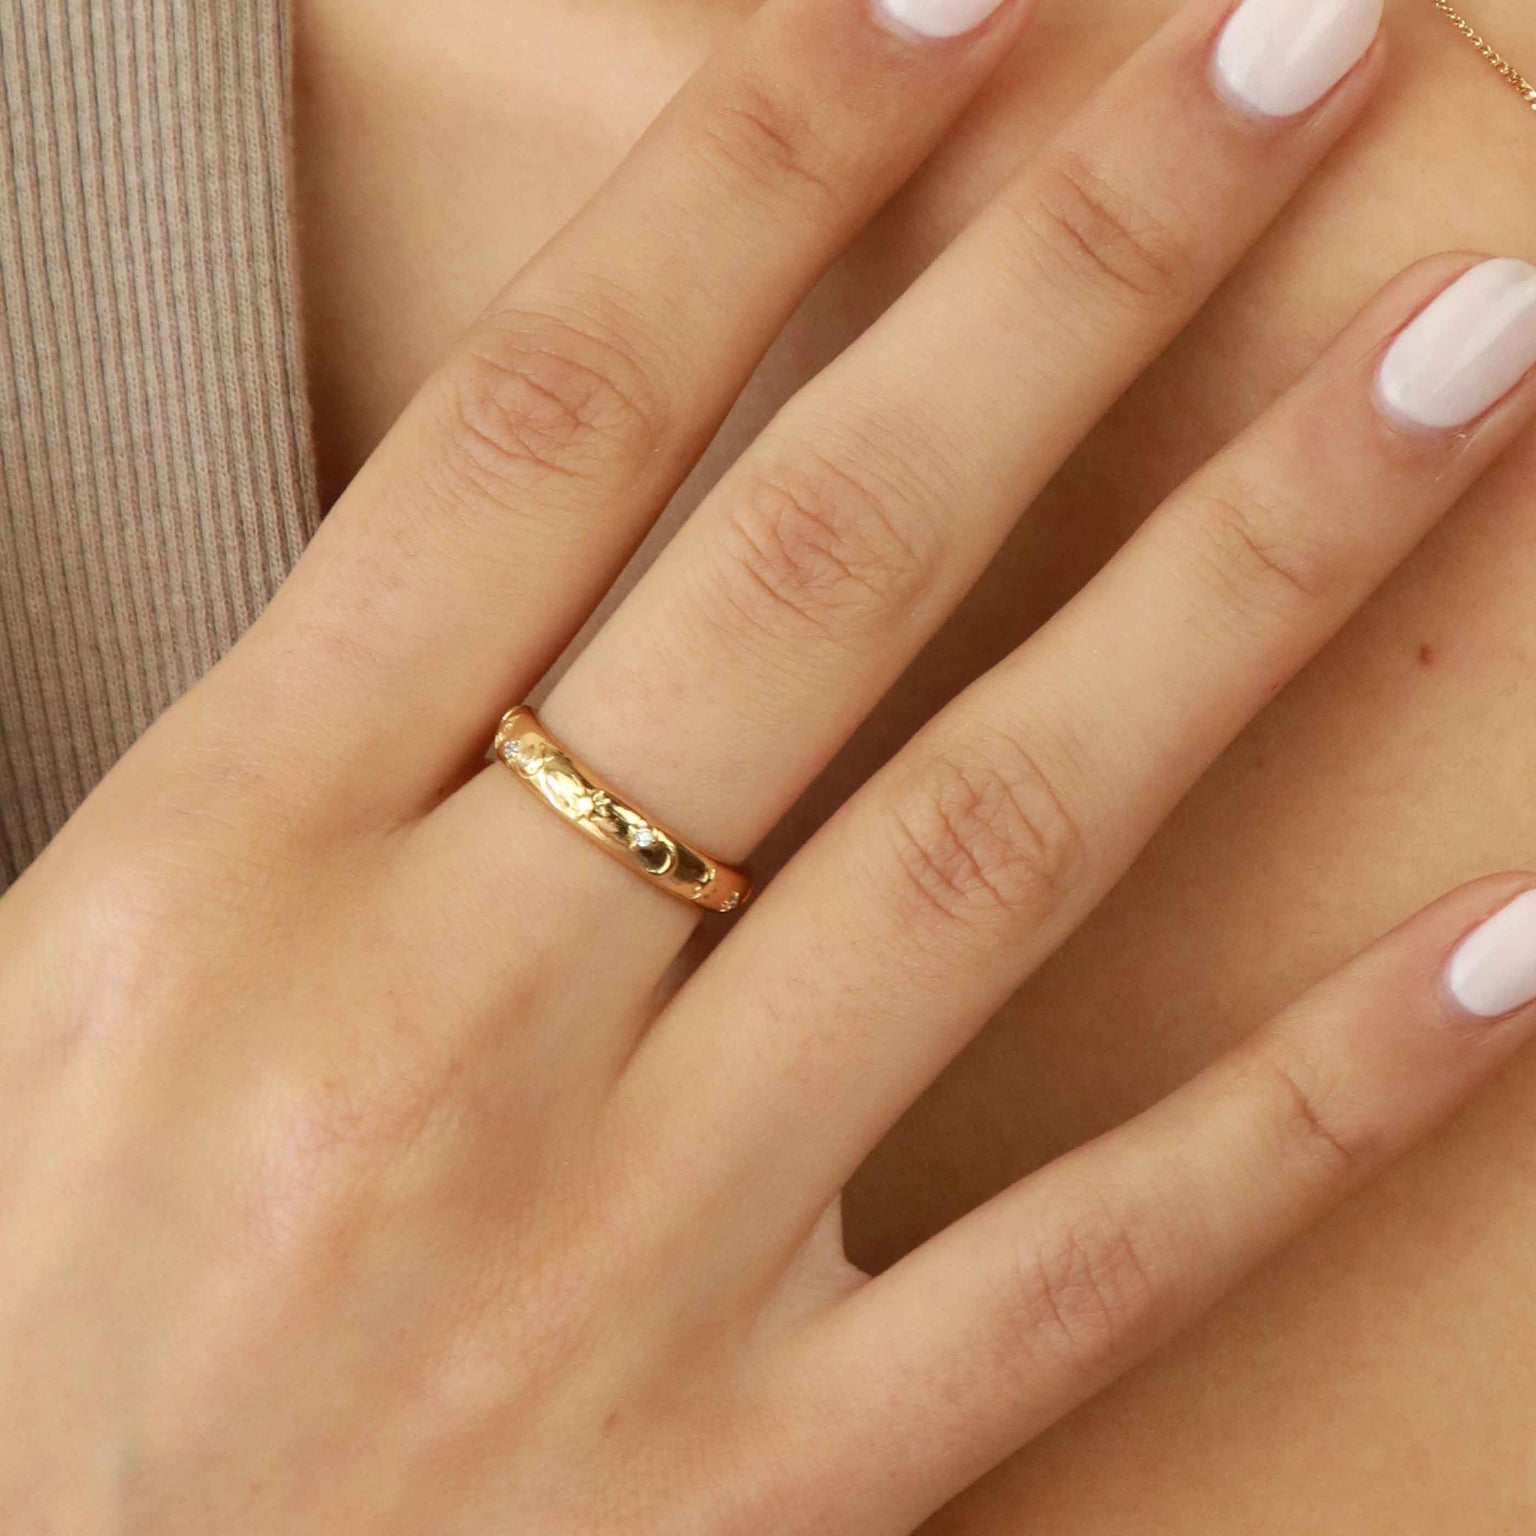 Celestial Band Ring in Gold